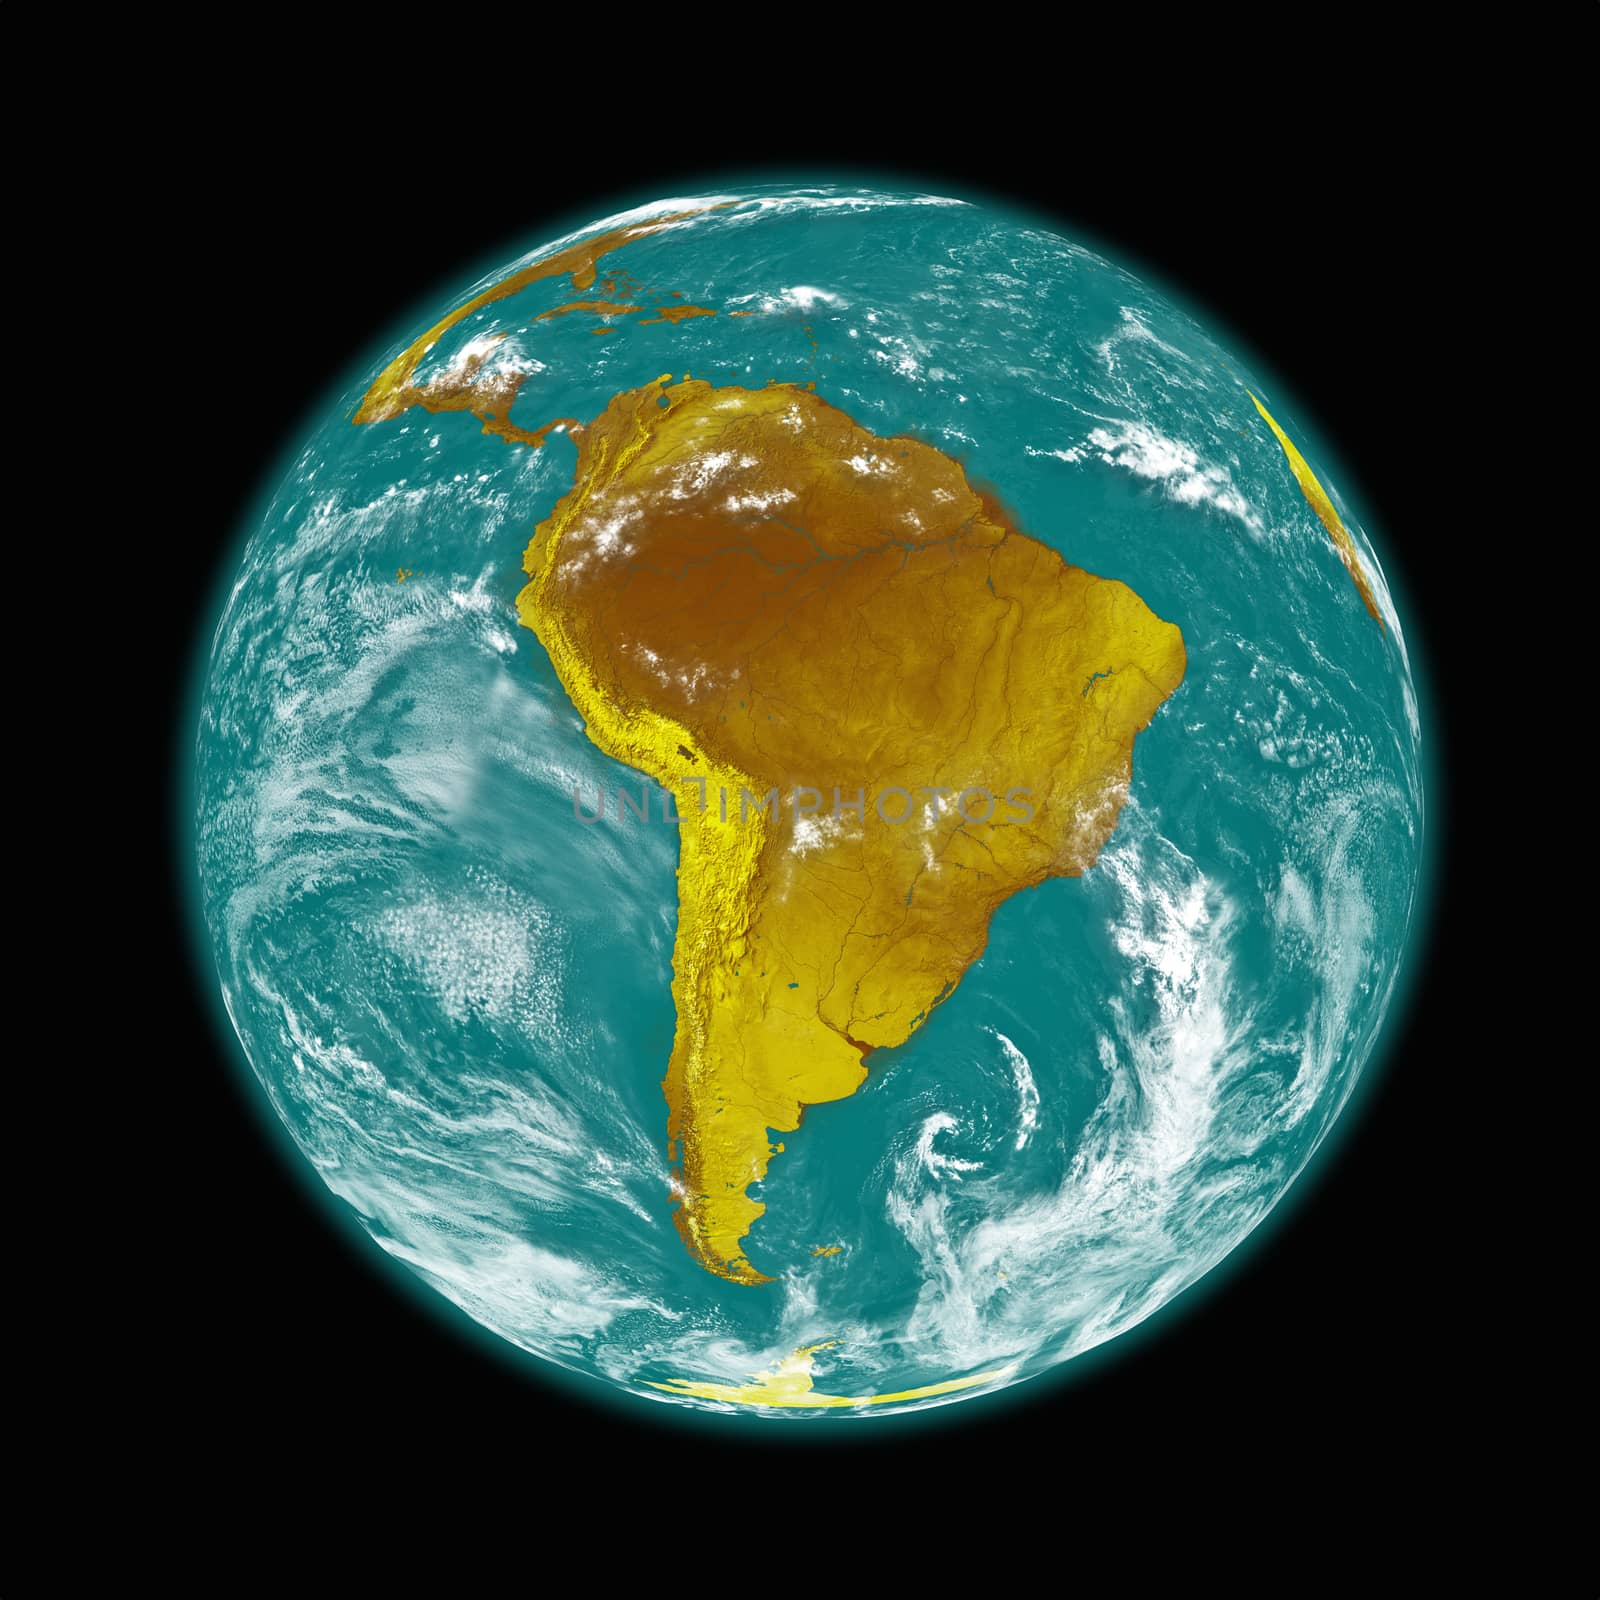 South America on Earth by Harvepino